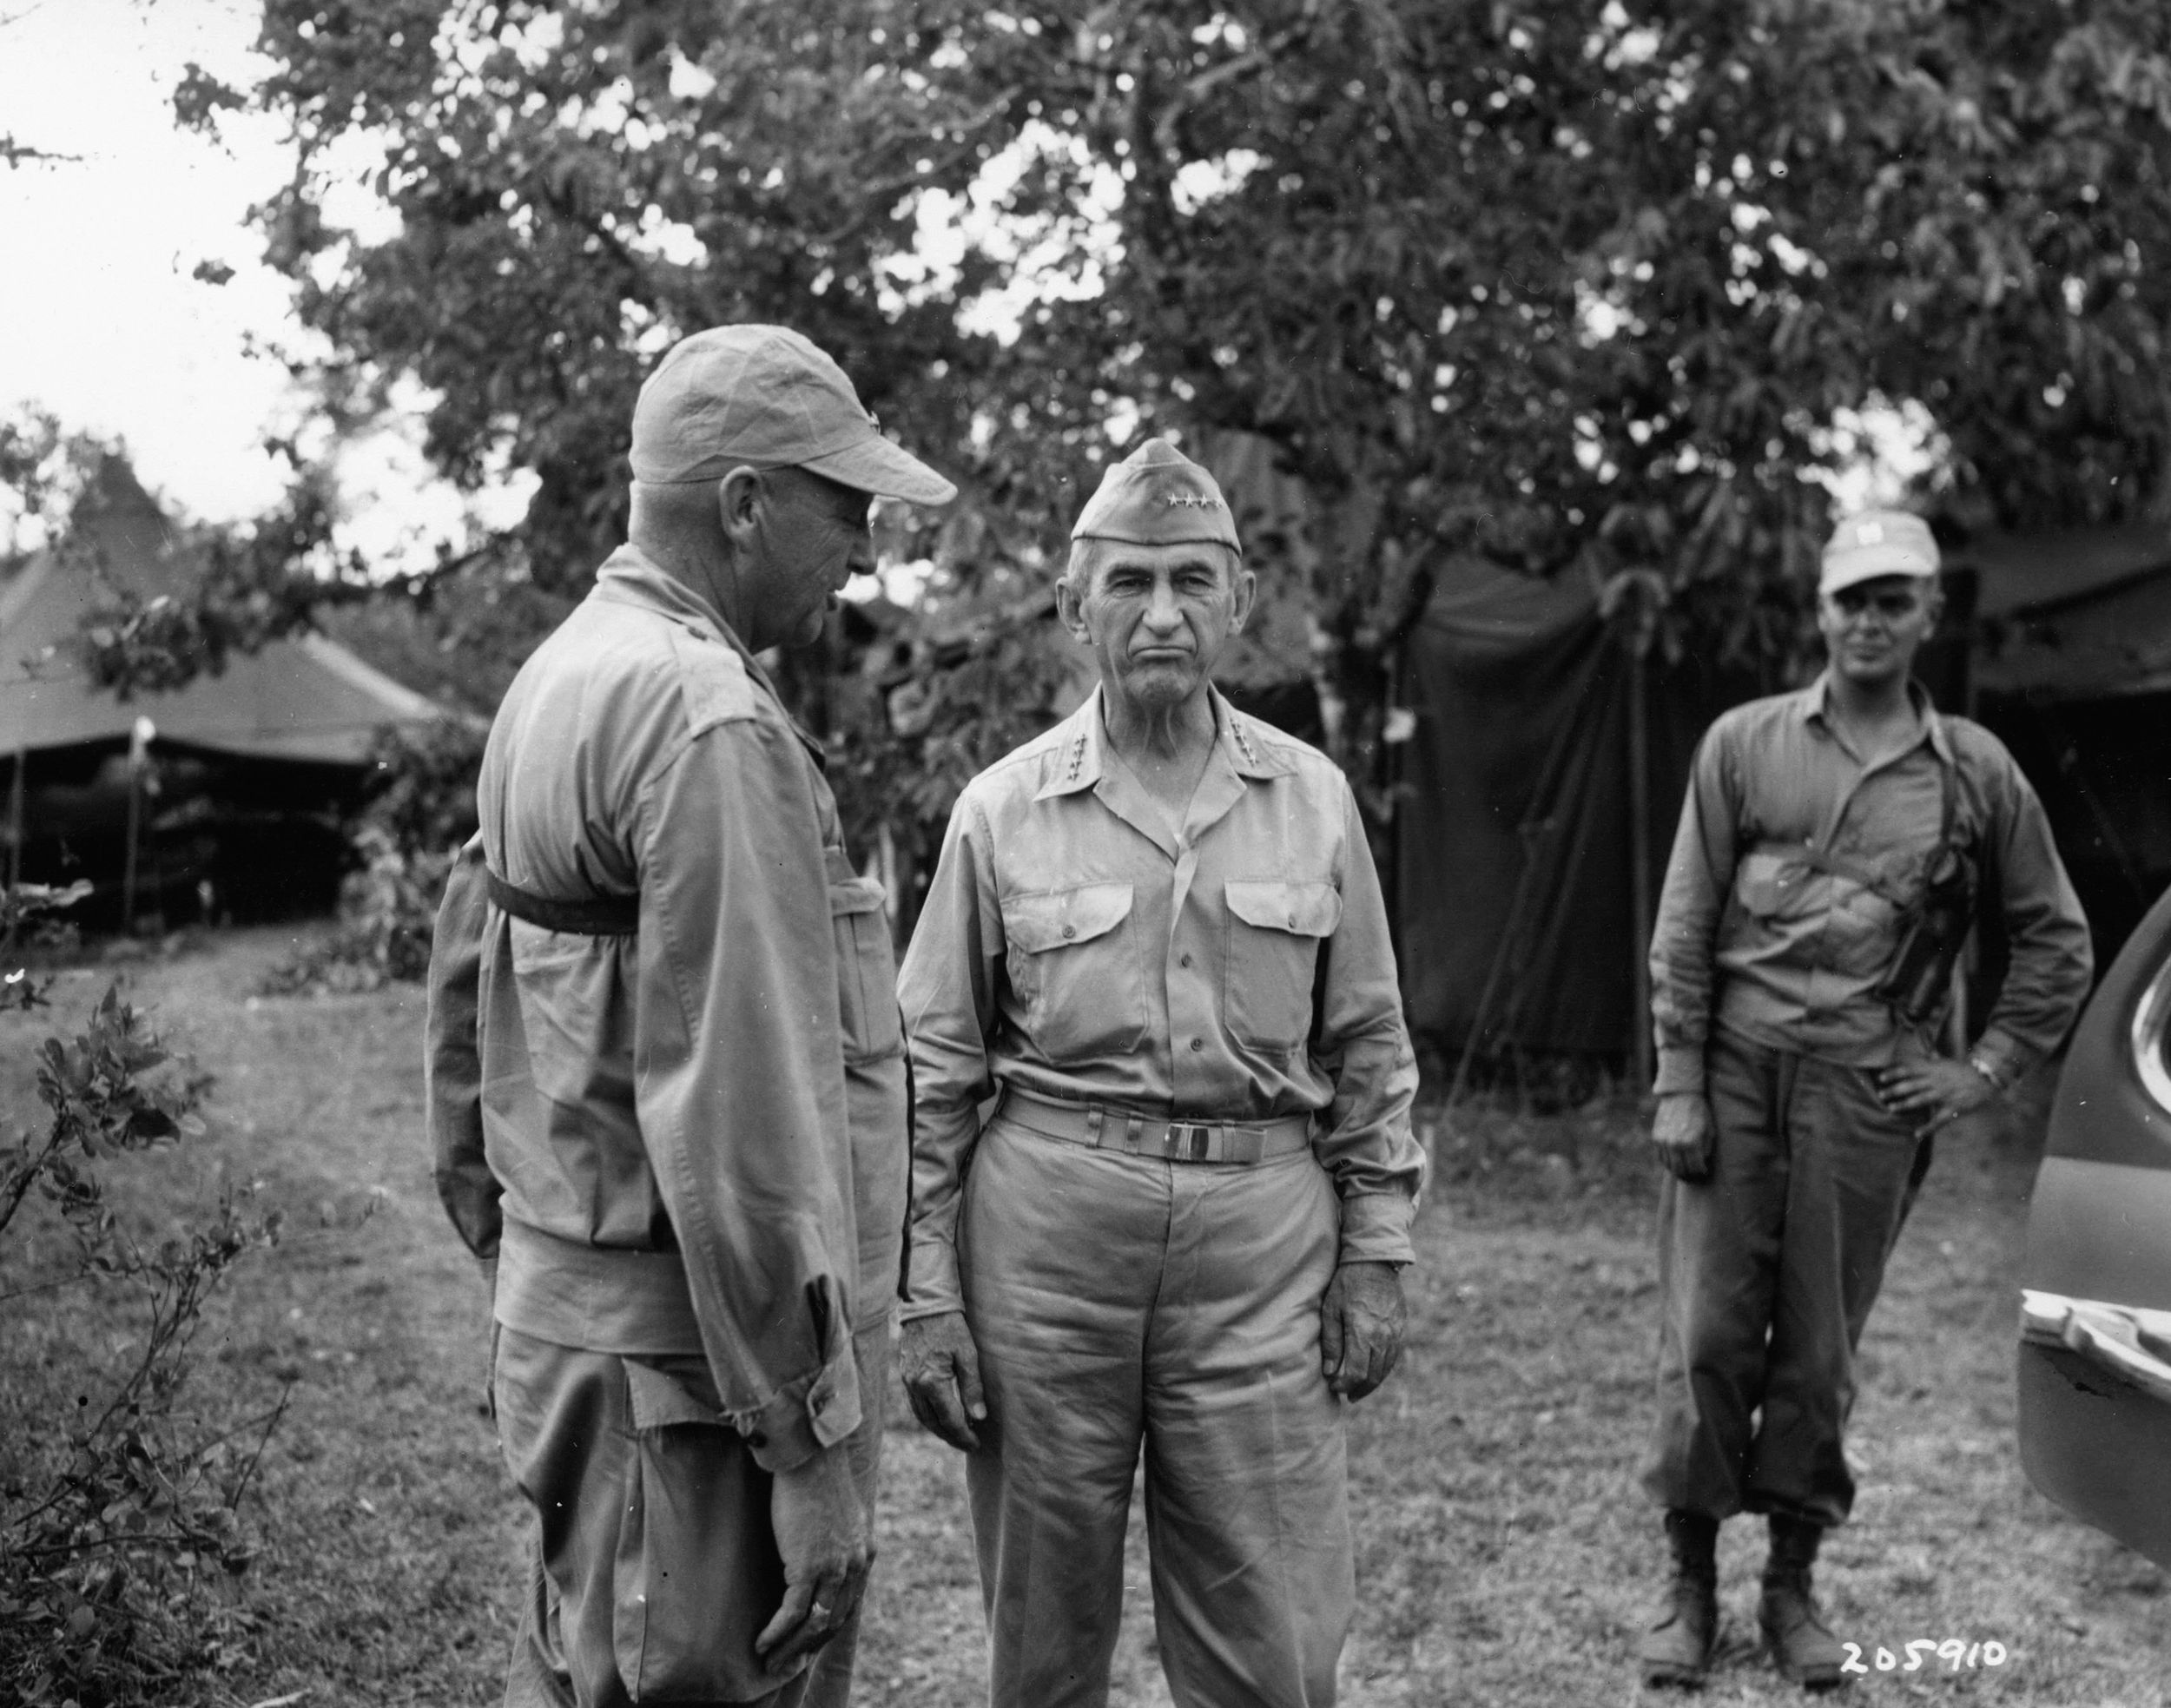 Major General Leonard F. Wing, commander of the U.S. 43rd Division, confers with General Walter C. Krueger, commander of the Sixth Army.